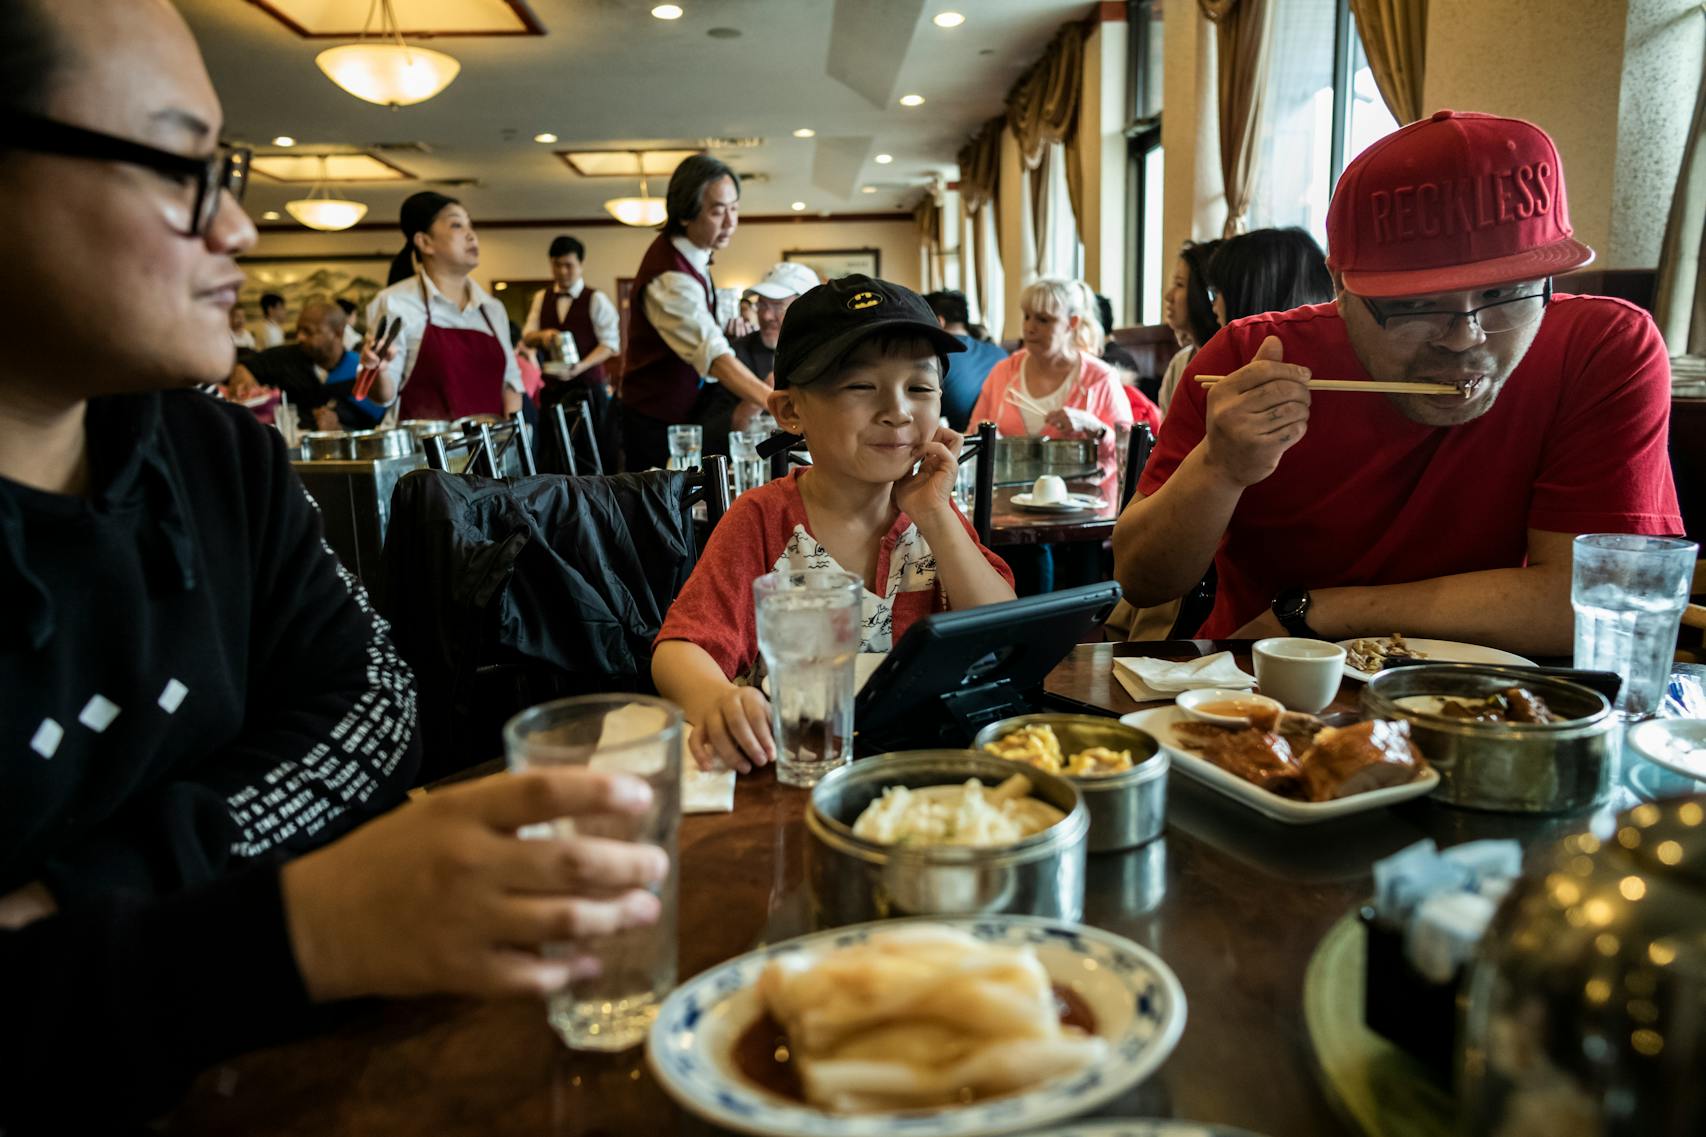 With his nephew Saiyan Ren part of the dining experience, far left, Sawanree Ren enjoys bringing his youngest son Jaxson,5, to eat dim sum . The family tries to dine out together twice a month so that they can remain familiar with Asian culture and food. ] Mandarin Kitchen is one of the favored dim sum spot in the Twin Cities where families come find their favorite dumplings. .RICHARD TSONG-TAATARII ¥ richard.tsong-taatarii@startribune.com